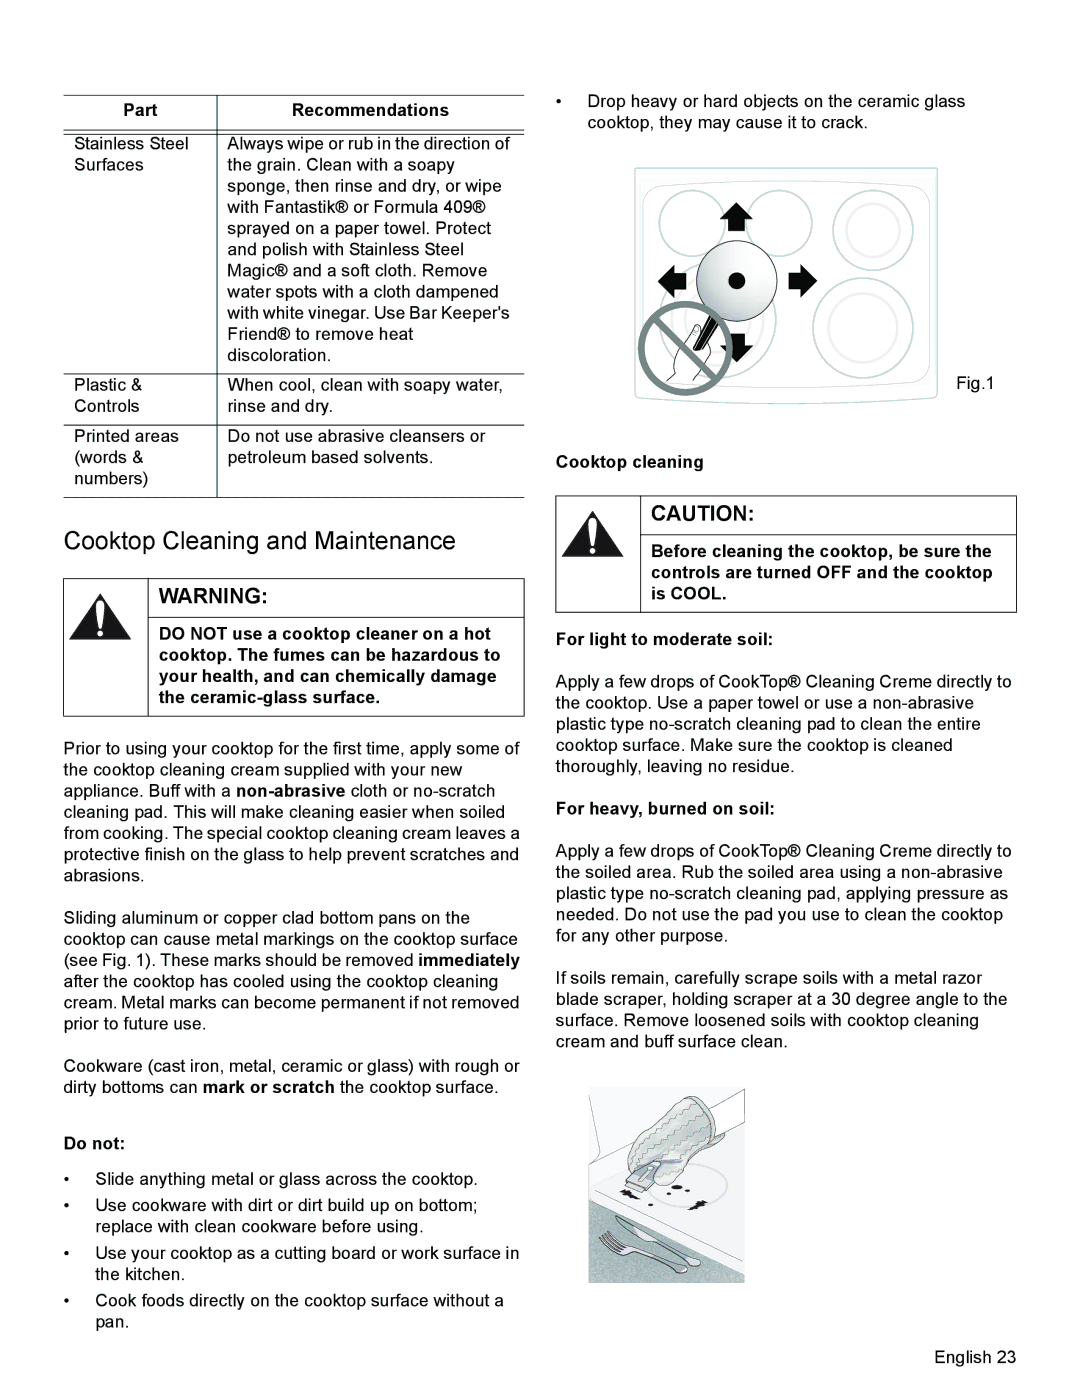 Bosch Appliances HES3023U manual Cooktop Cleaning and Maintenance, Do not, For heavy, burned on soil 